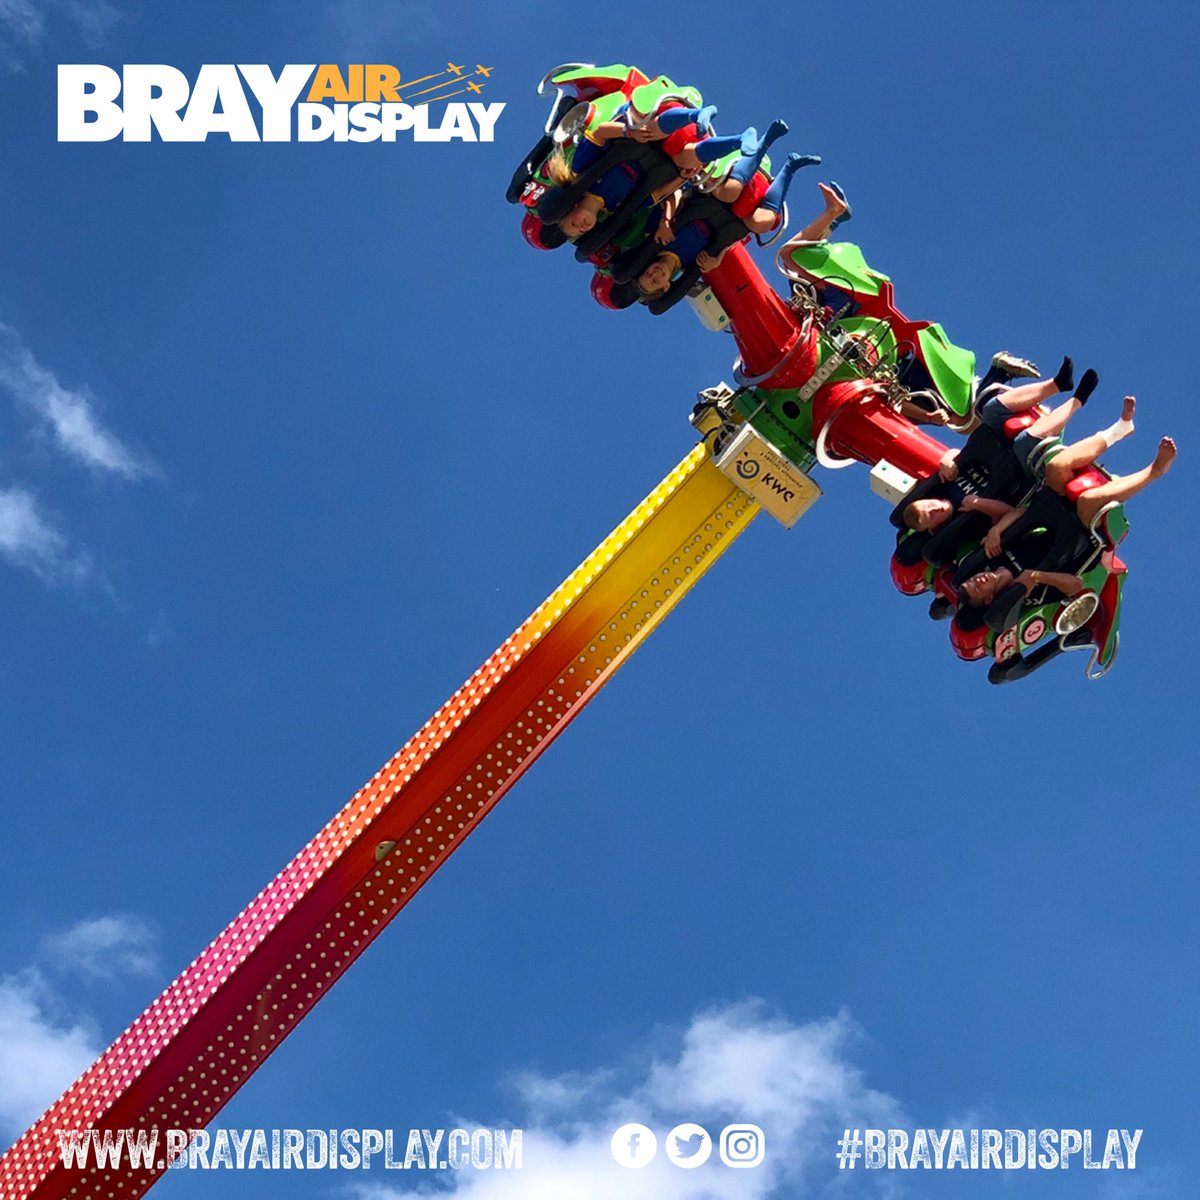 The Seafront funfair stays open until 10 pm tonight. 📅 #BrayAirDisplay | July 29 & July 30 🎢 Ground Entertainment - daily from 12 ✈️ Airshow - 3 pm on both days ℹ︎ ➜ brayairdisplay.com #SummerInBray #LoveBray #Heli60